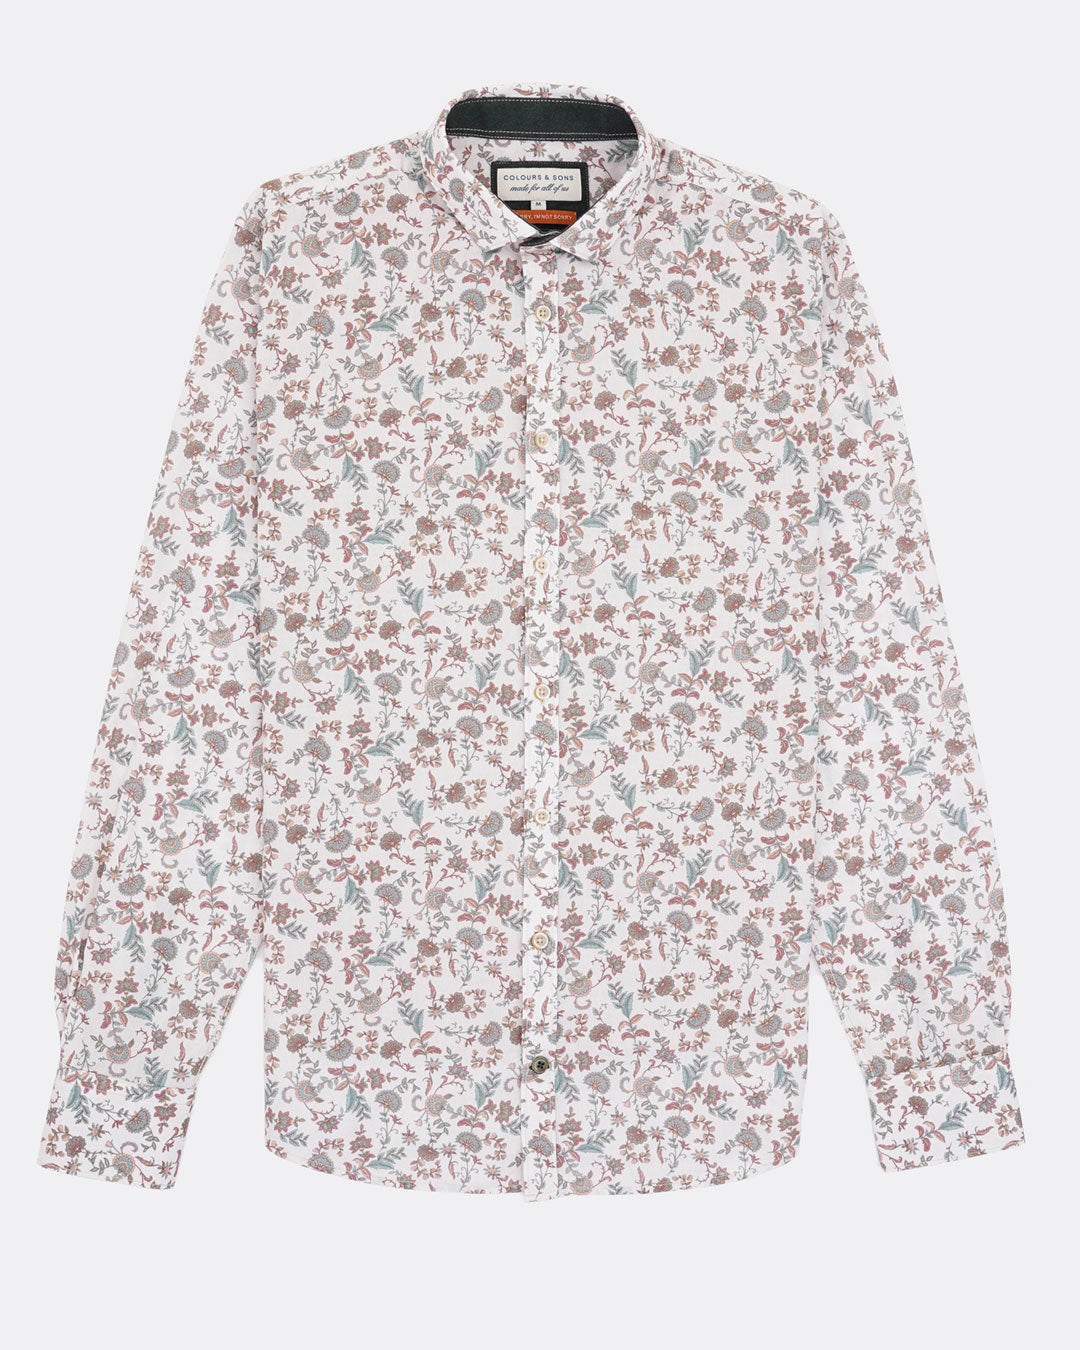 Shirt Offwhite Floral - Offwhite Floral